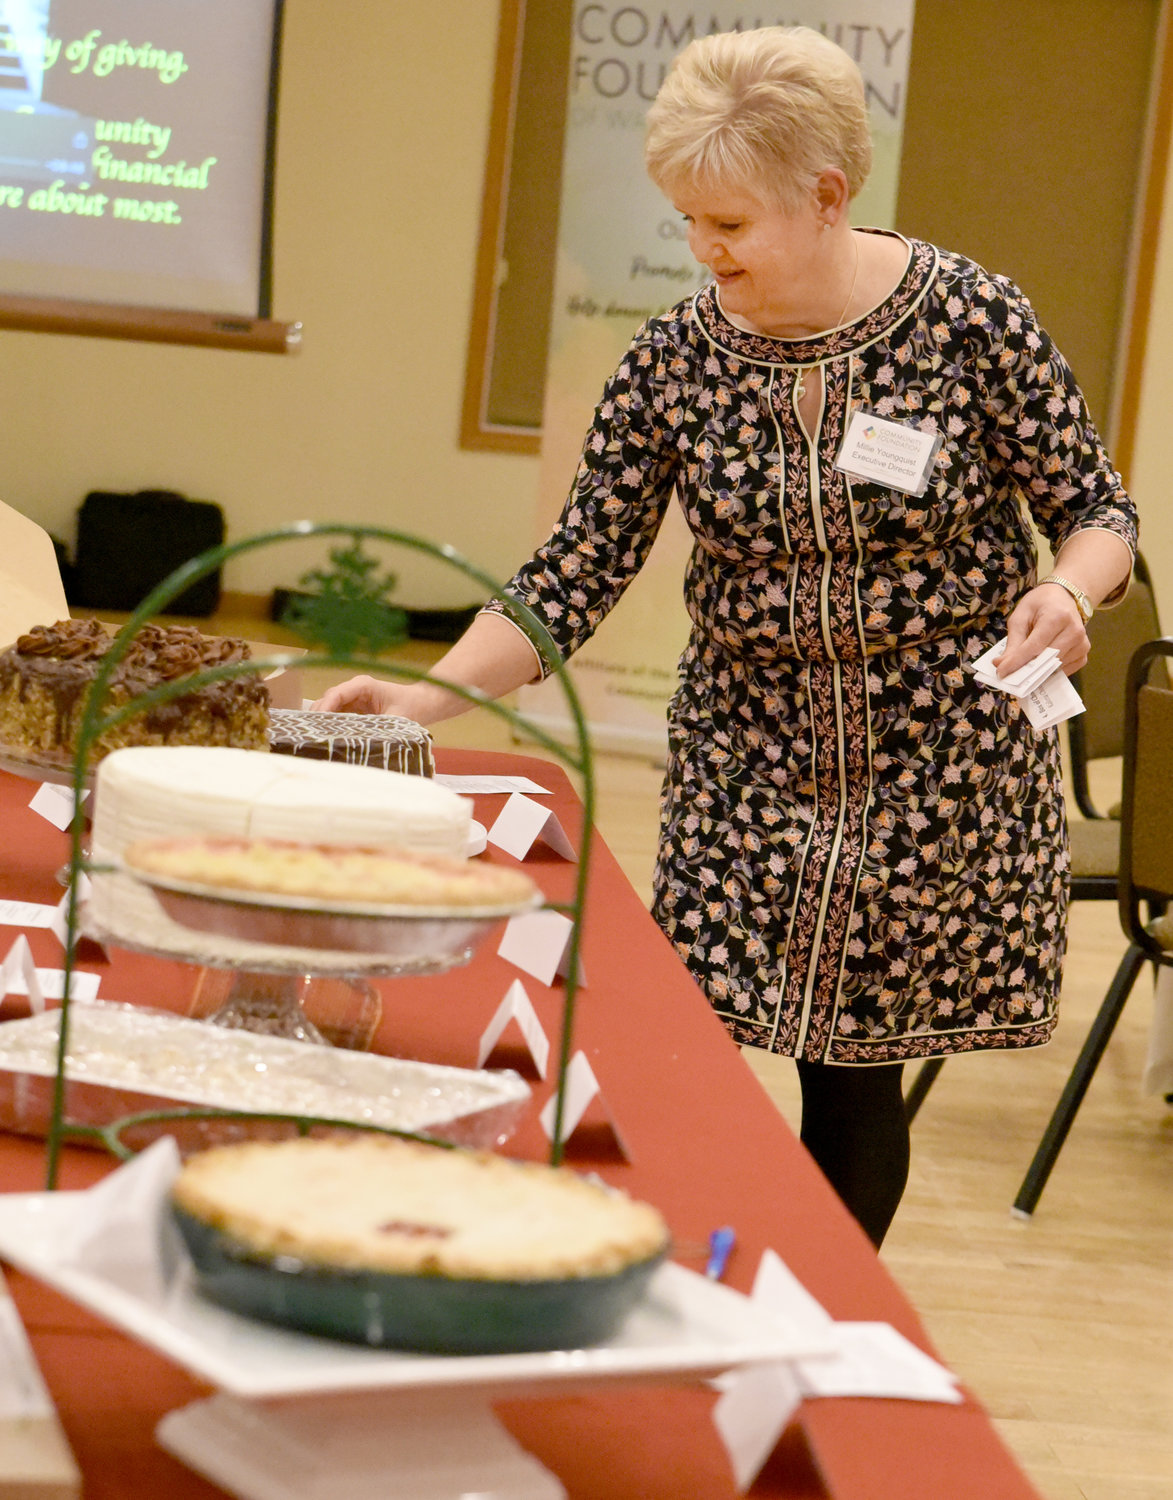 Washington County Community Foundation Executive Director Millie Youngquist labels the many beautiful desserts for the auction, benefitting the foundation and the Kalona Historical Village, at the dinner on Nov. 4.